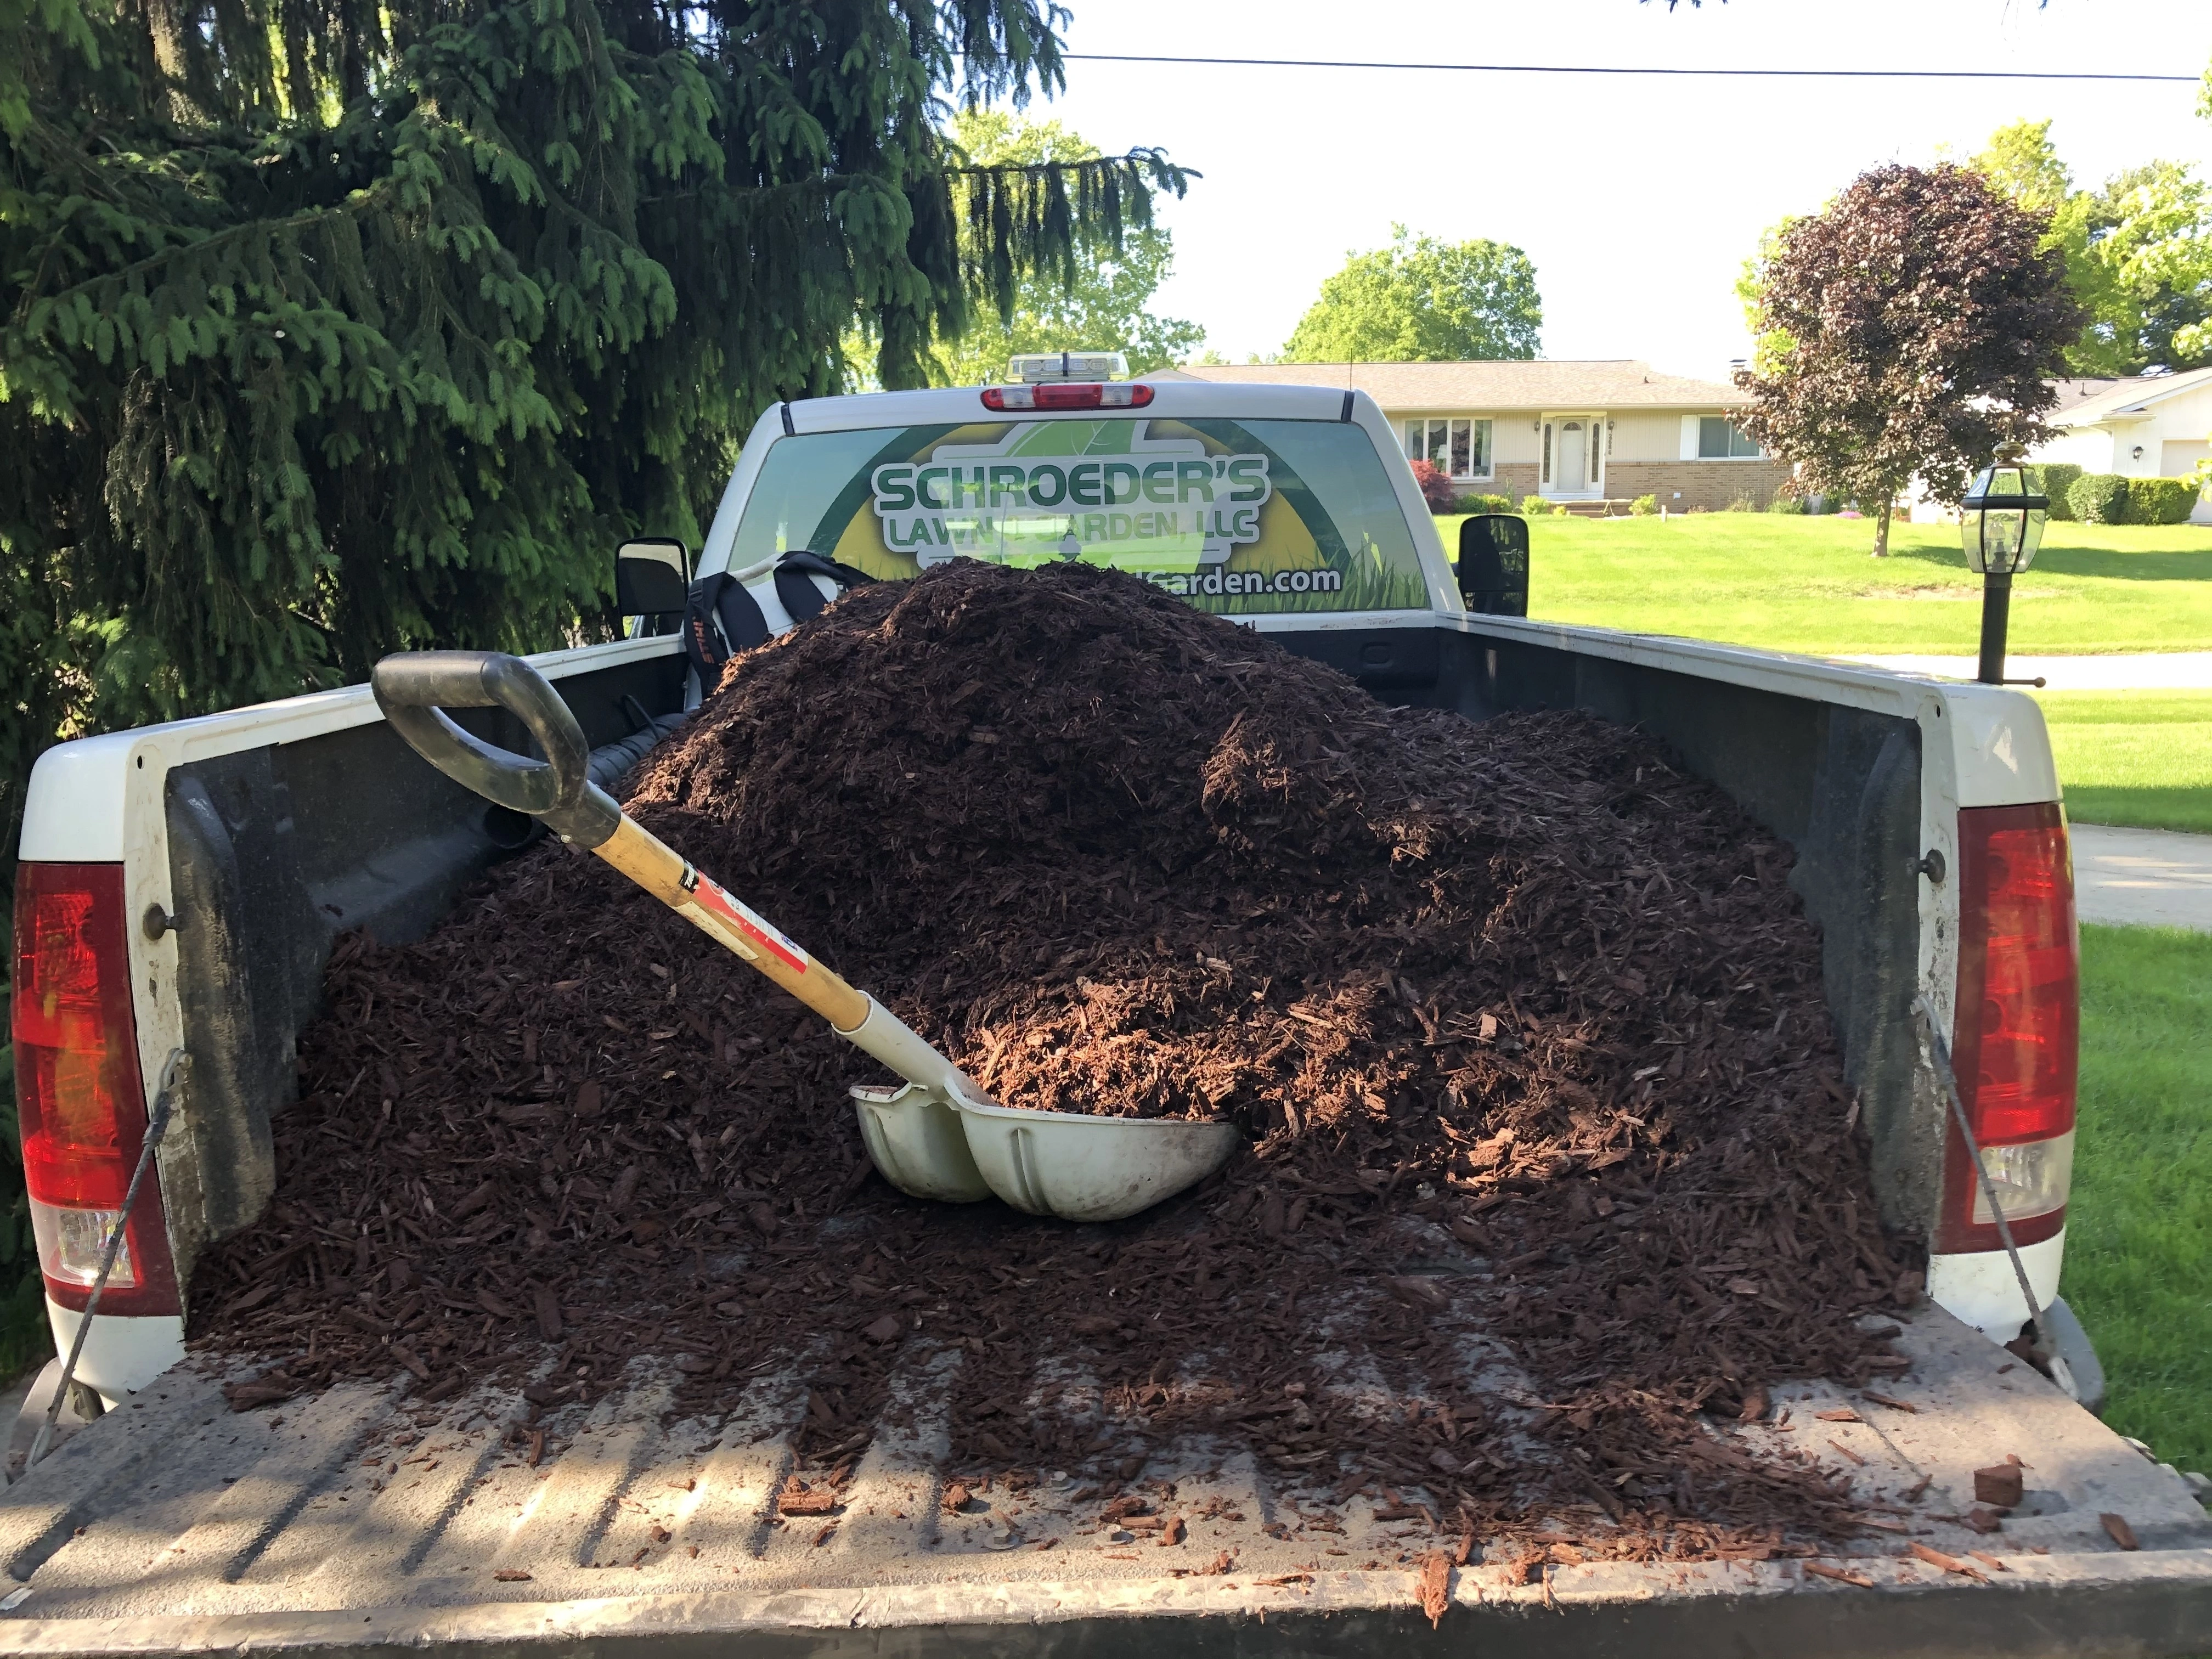 New mulch being laid in landscape bed at Lenawee home.